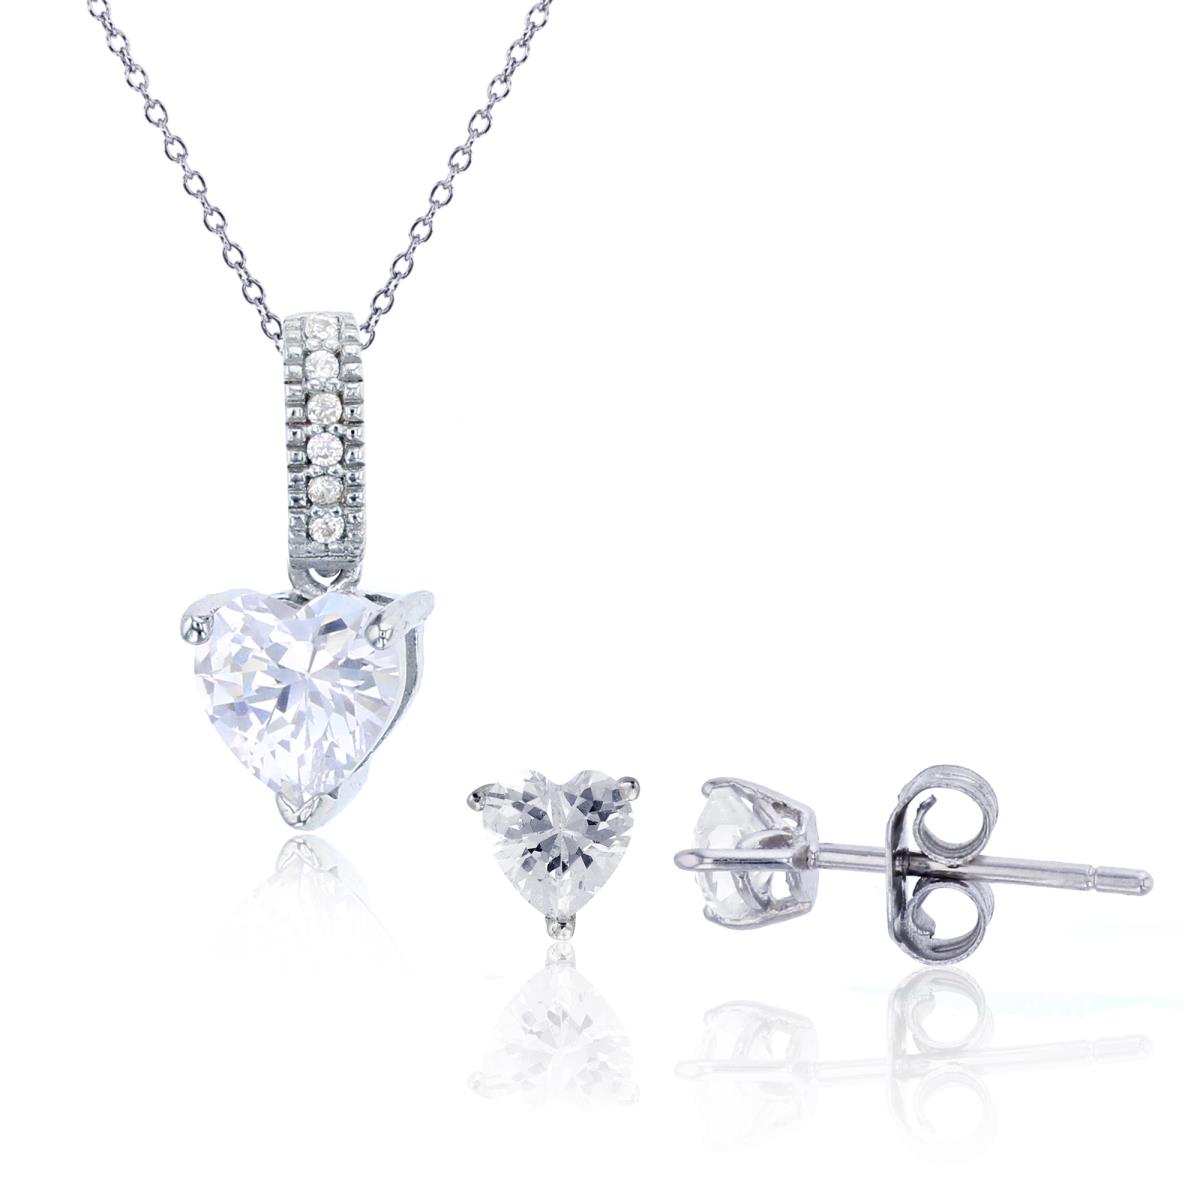 Sterling Silver Rhodium 6mm Heart Shape Paved Bail 13"+2" Necklace & 4mm Heart Solitaire Stud Earring Set